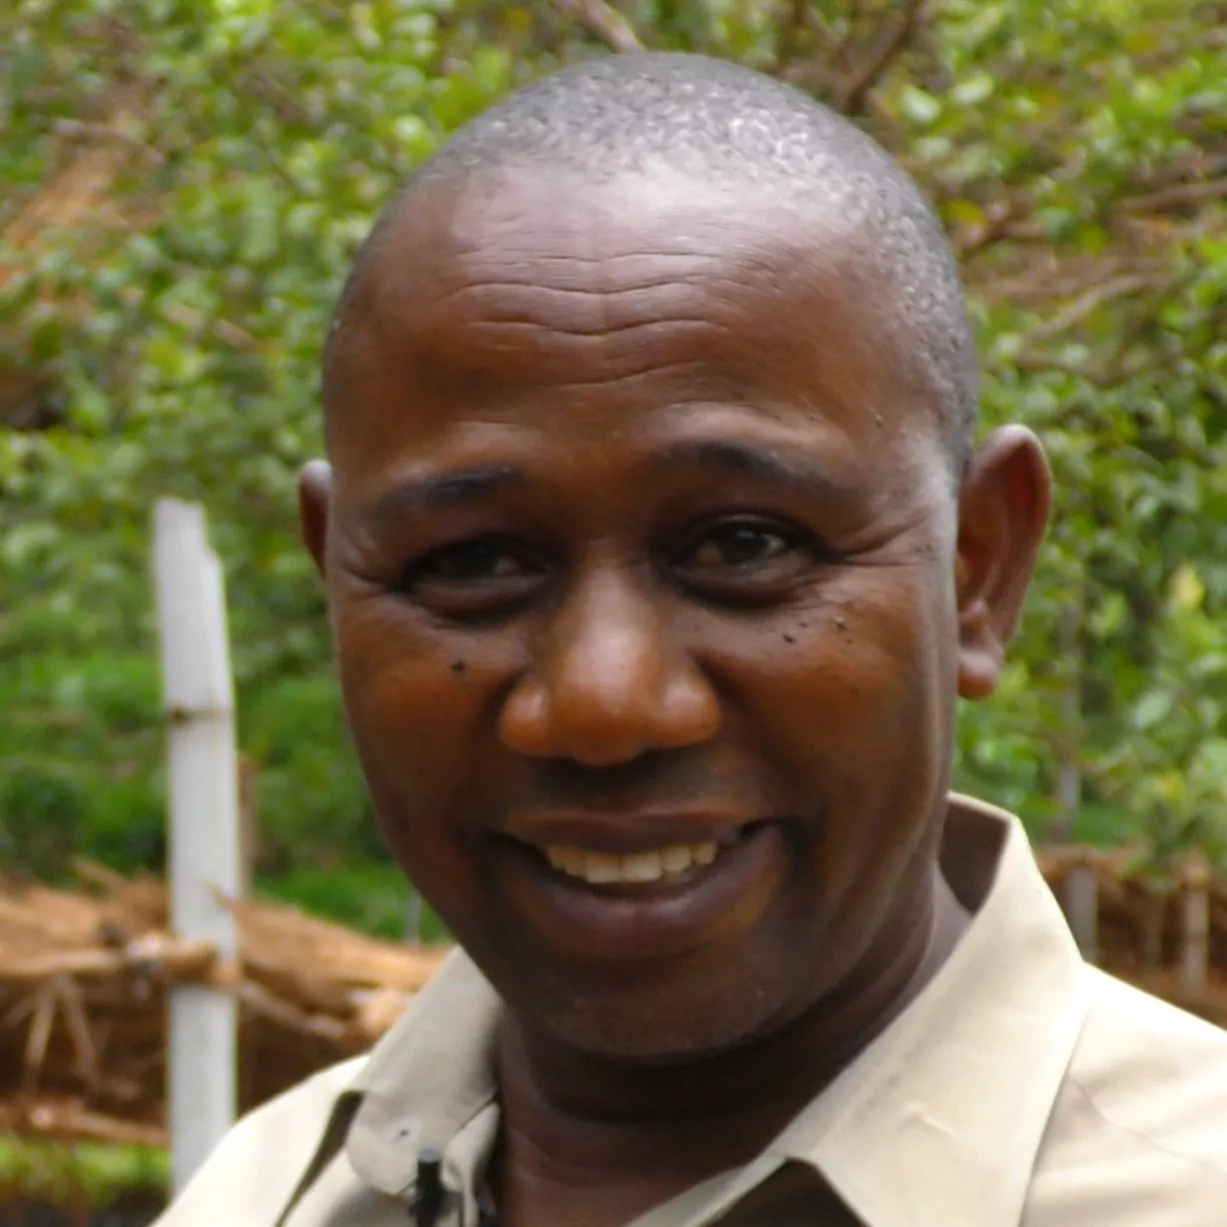 Richard’s enterprise is called Beneco and it’s one of over 30 throughout Uganda which supply seedlings to Ecotrust’s Trees for Global Benefits project. His nursery has 8 full-time and 30 seasonal employees.